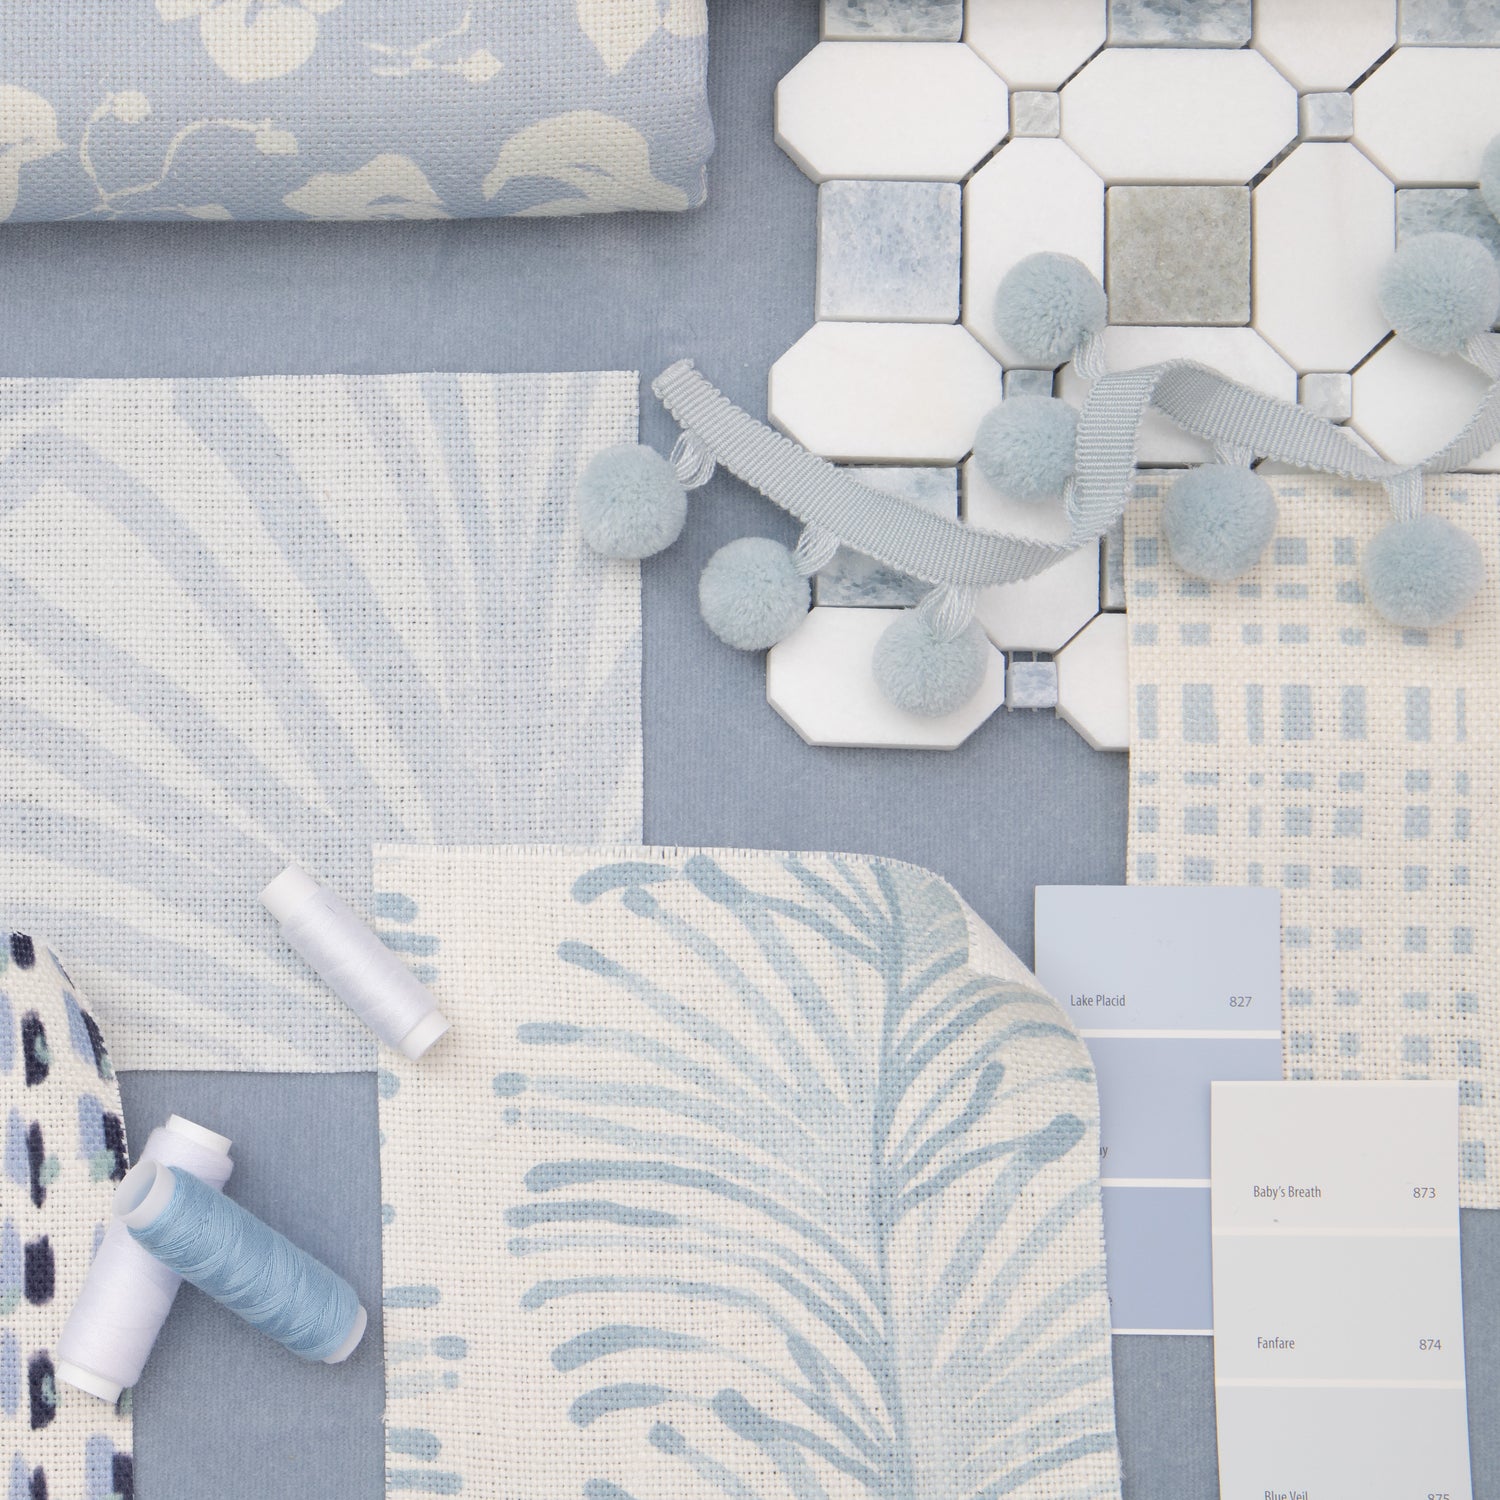 Interior design moodboard and fabric inspirations with Cornflower Blue Floral Printed Linen Swatch, Sky Blue Palm Printed Linen Swatch, Sky and Navy Blue Poppy Printed Linen Swatch, and Sky Blue Botanical Stripe Printed Swatch